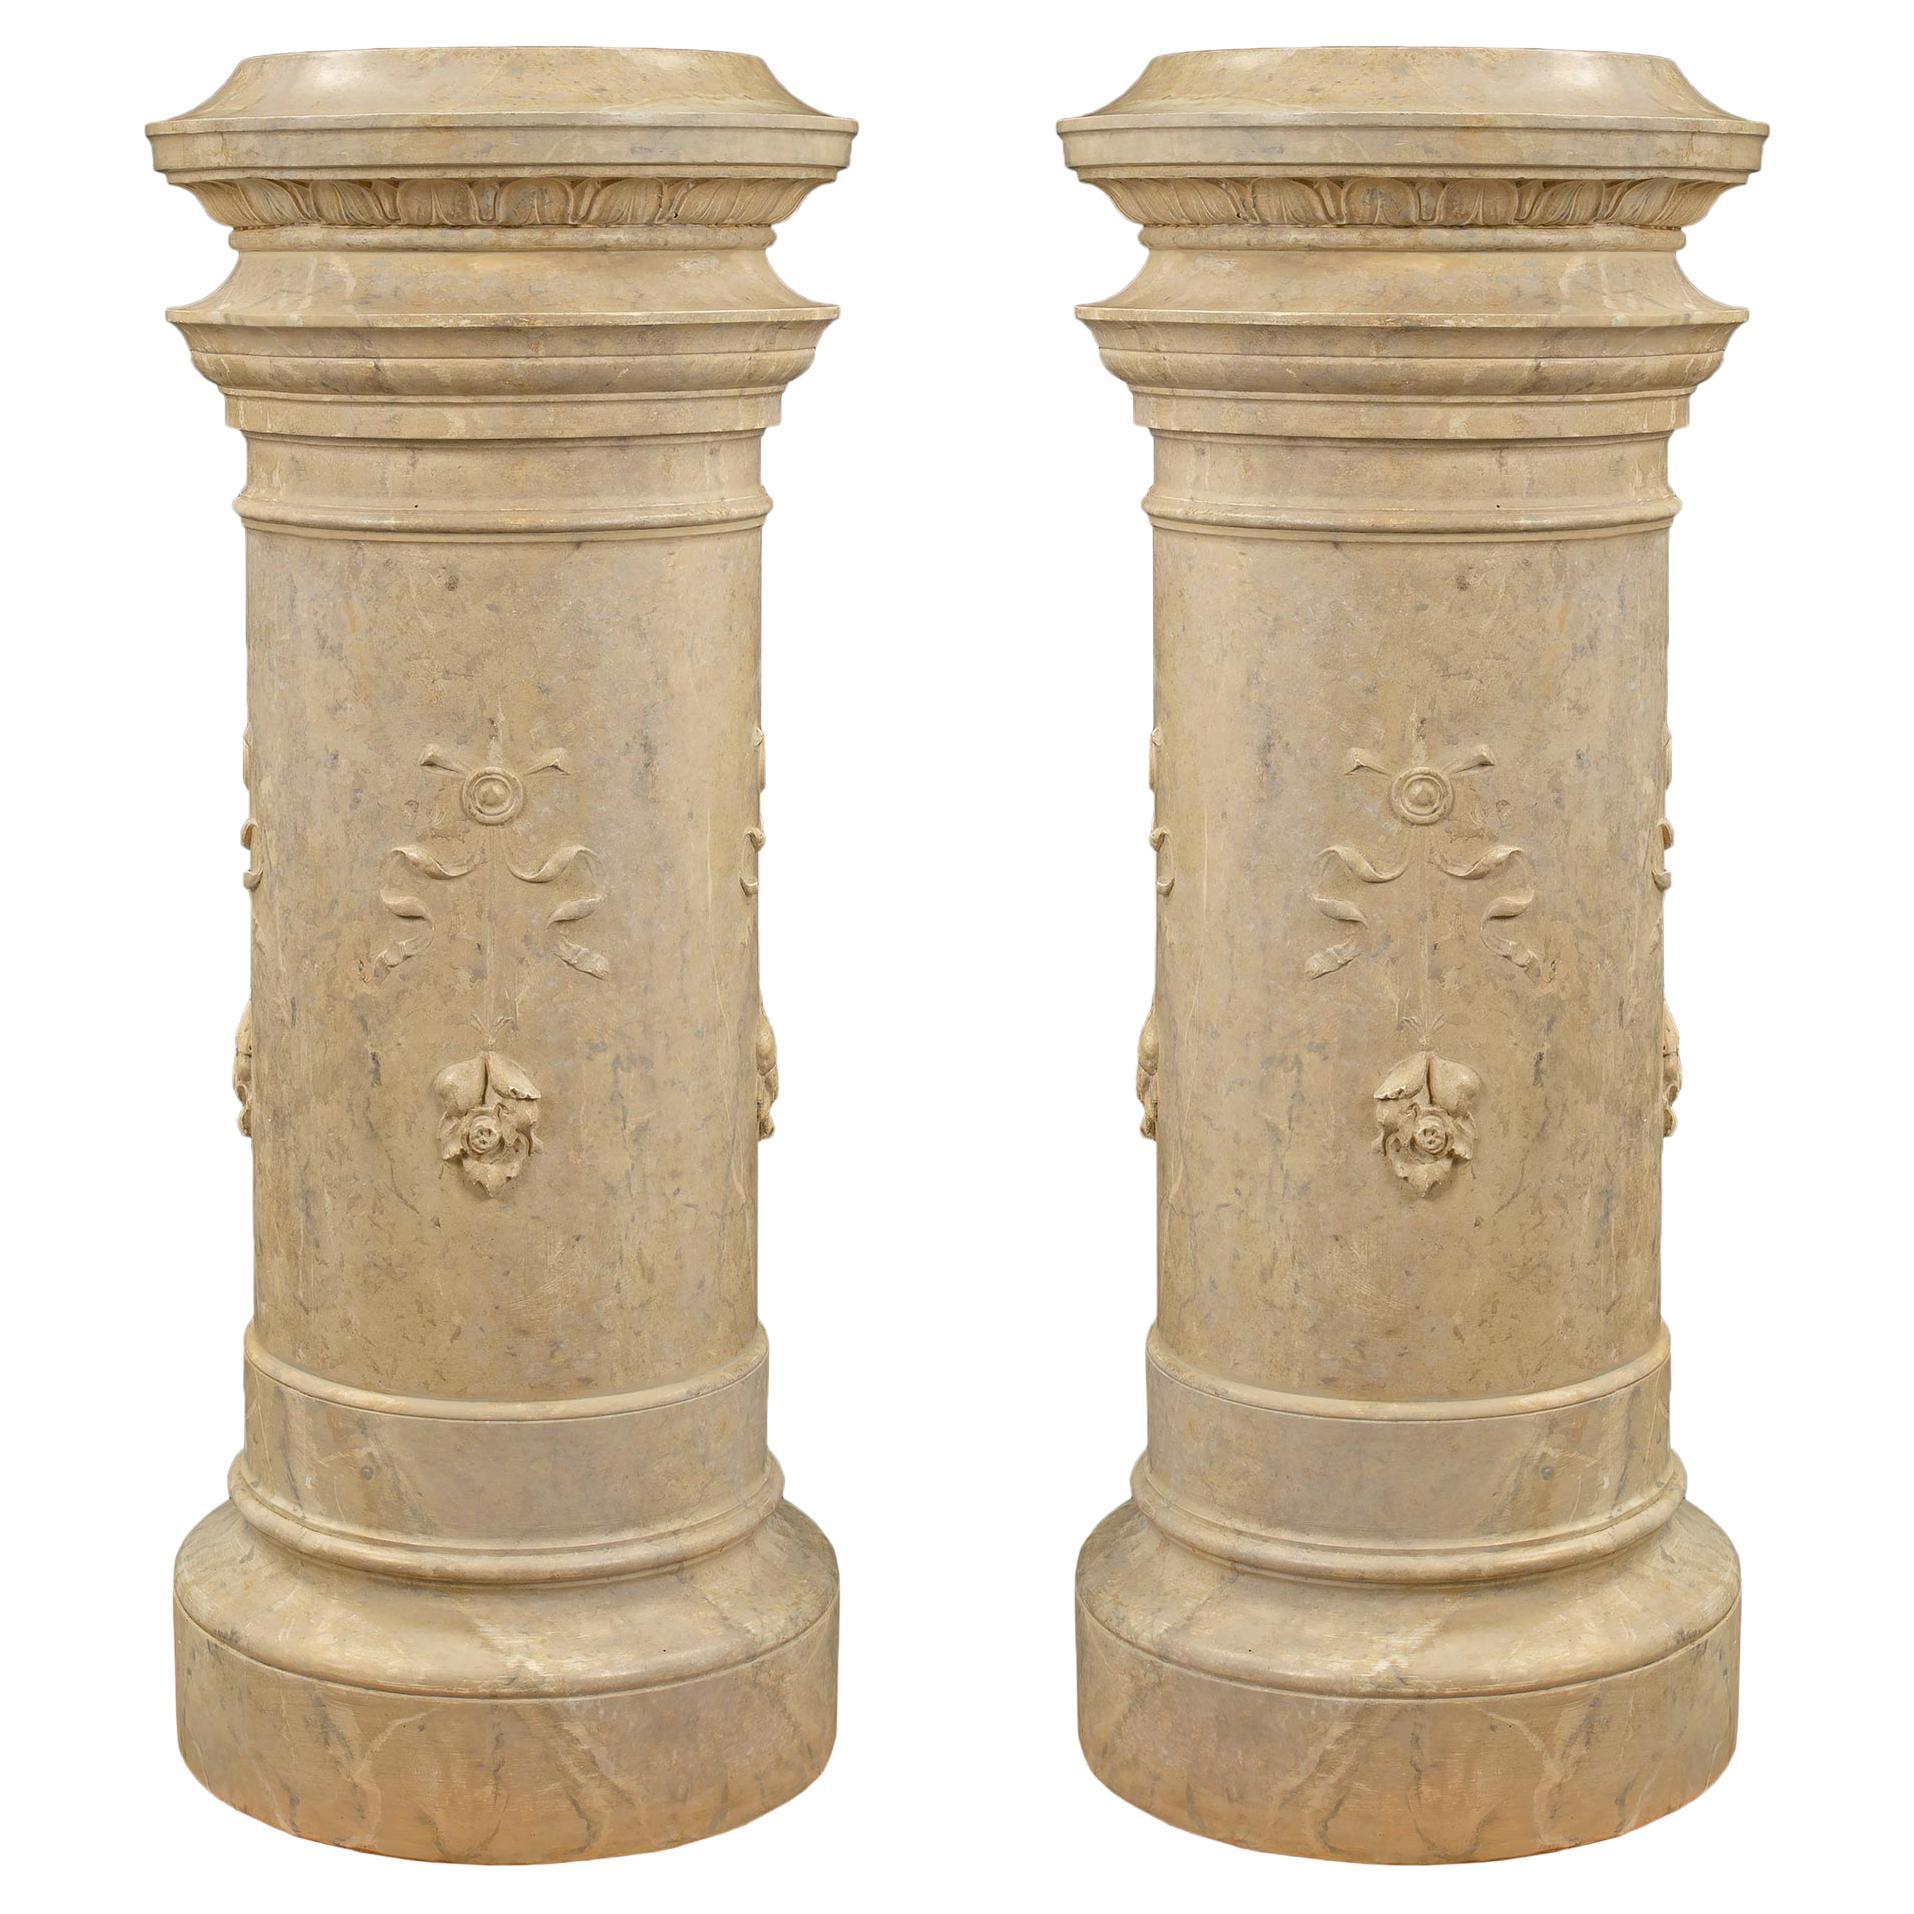  French 19th Century Louis XVI Style Plaster Columns with a Faux Marble Finish